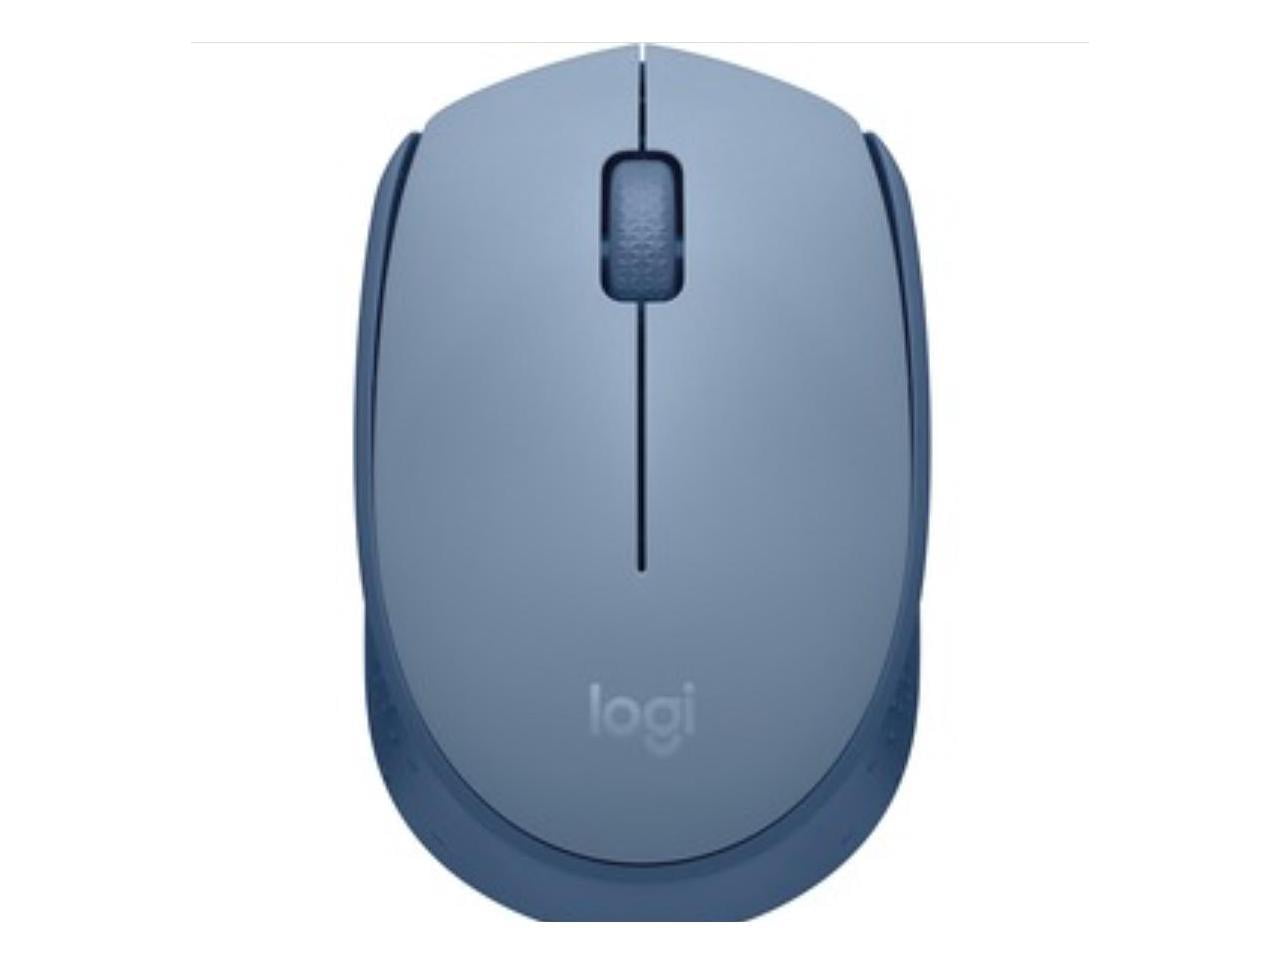 Logitech Design Wireless Mouse Limited Edition - USB Receiver, 12 months AA  Battery Life, Portable & Lightweight, Easy Plug & Play with Broad